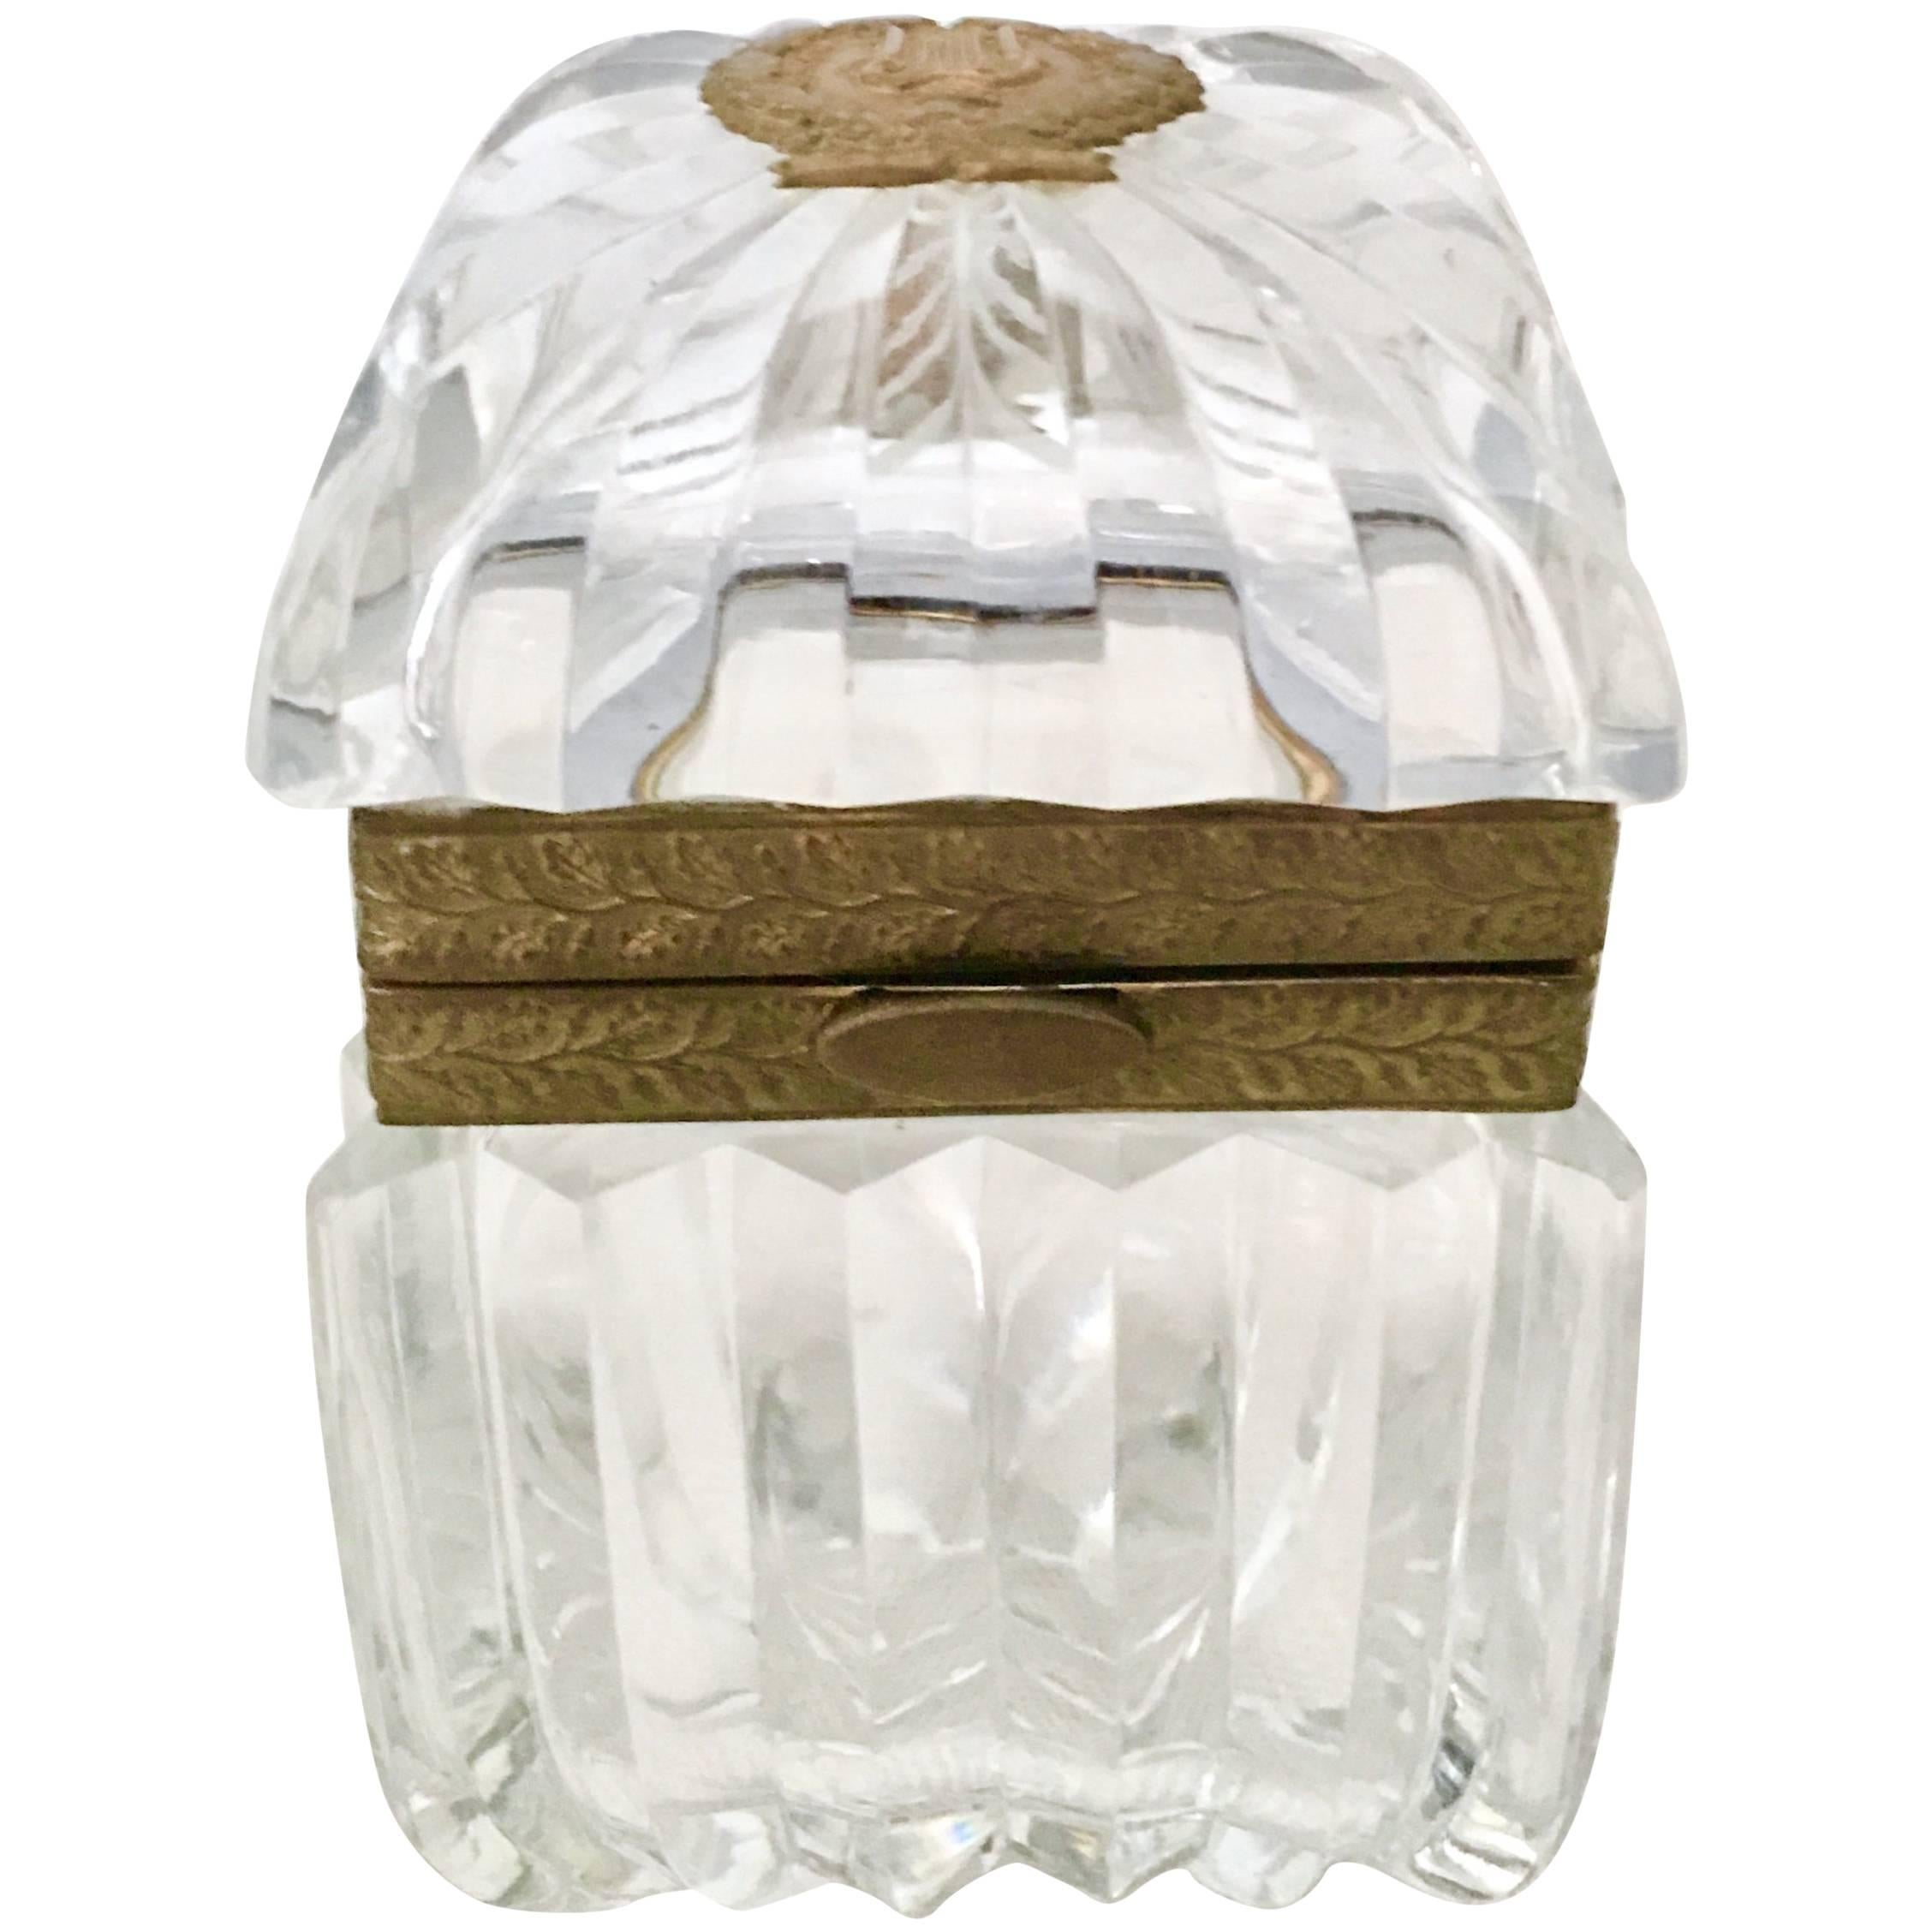 VIntage French Cut Crystal and Bronze "Casket" Box